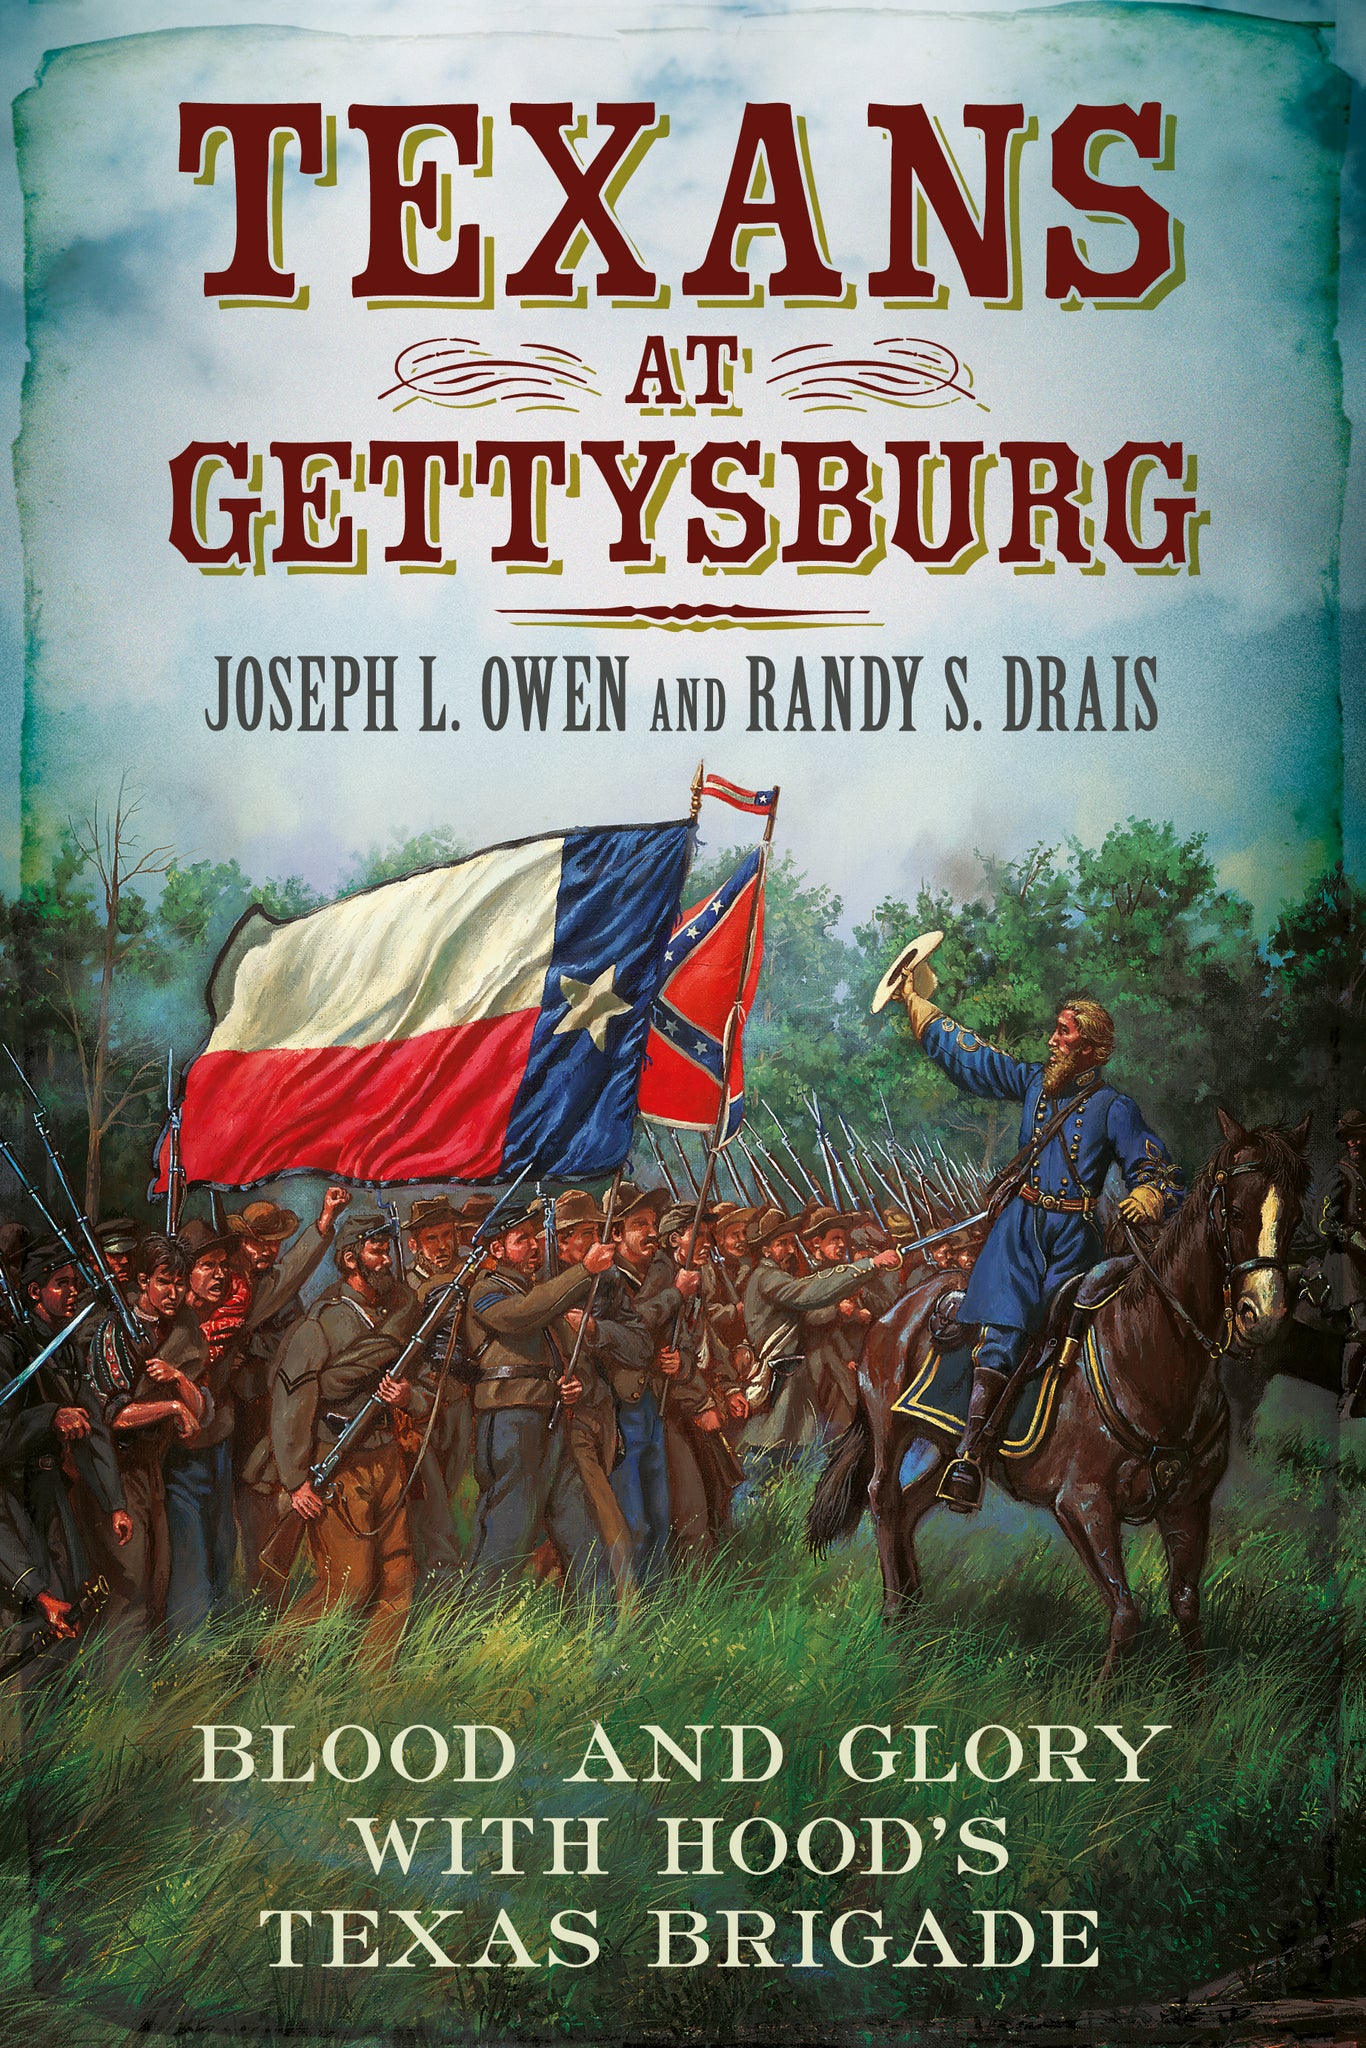 Texans at Gettysburg: Blood and Glory with Hood’s Texas Brigade